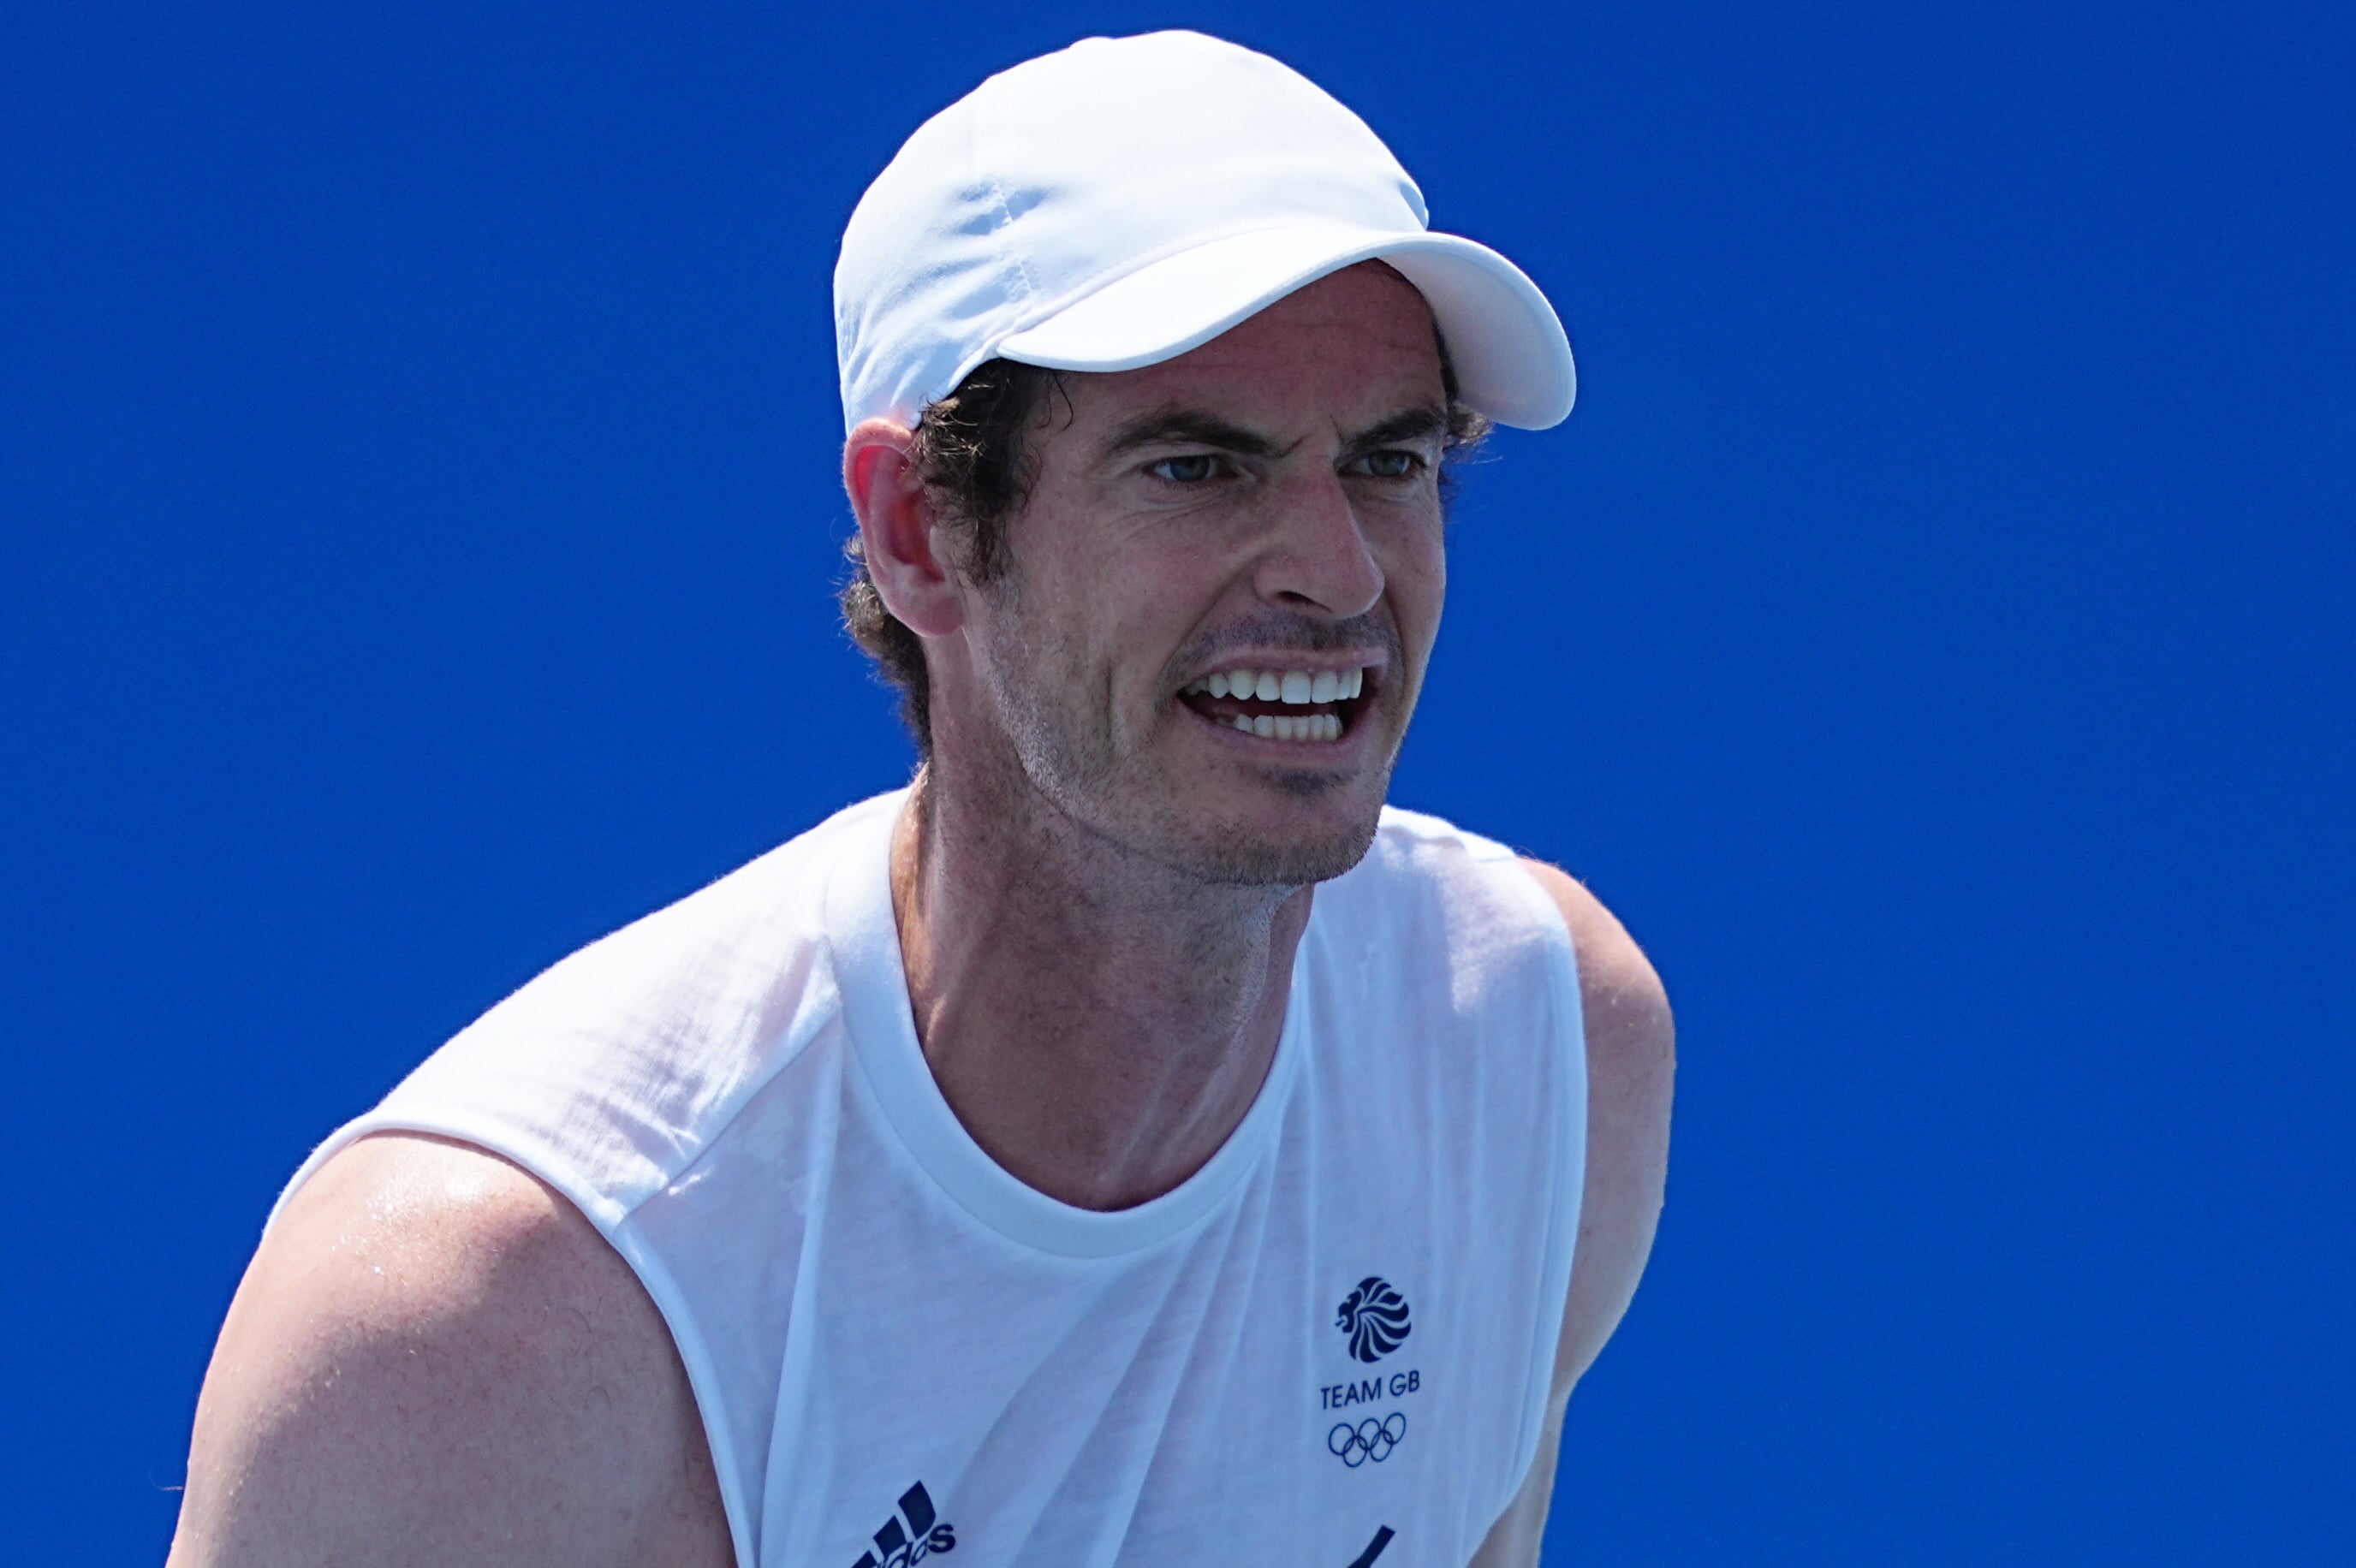 Andy Murray, pictured, will face Stefanos Tsitsipas at the US Open (PA)